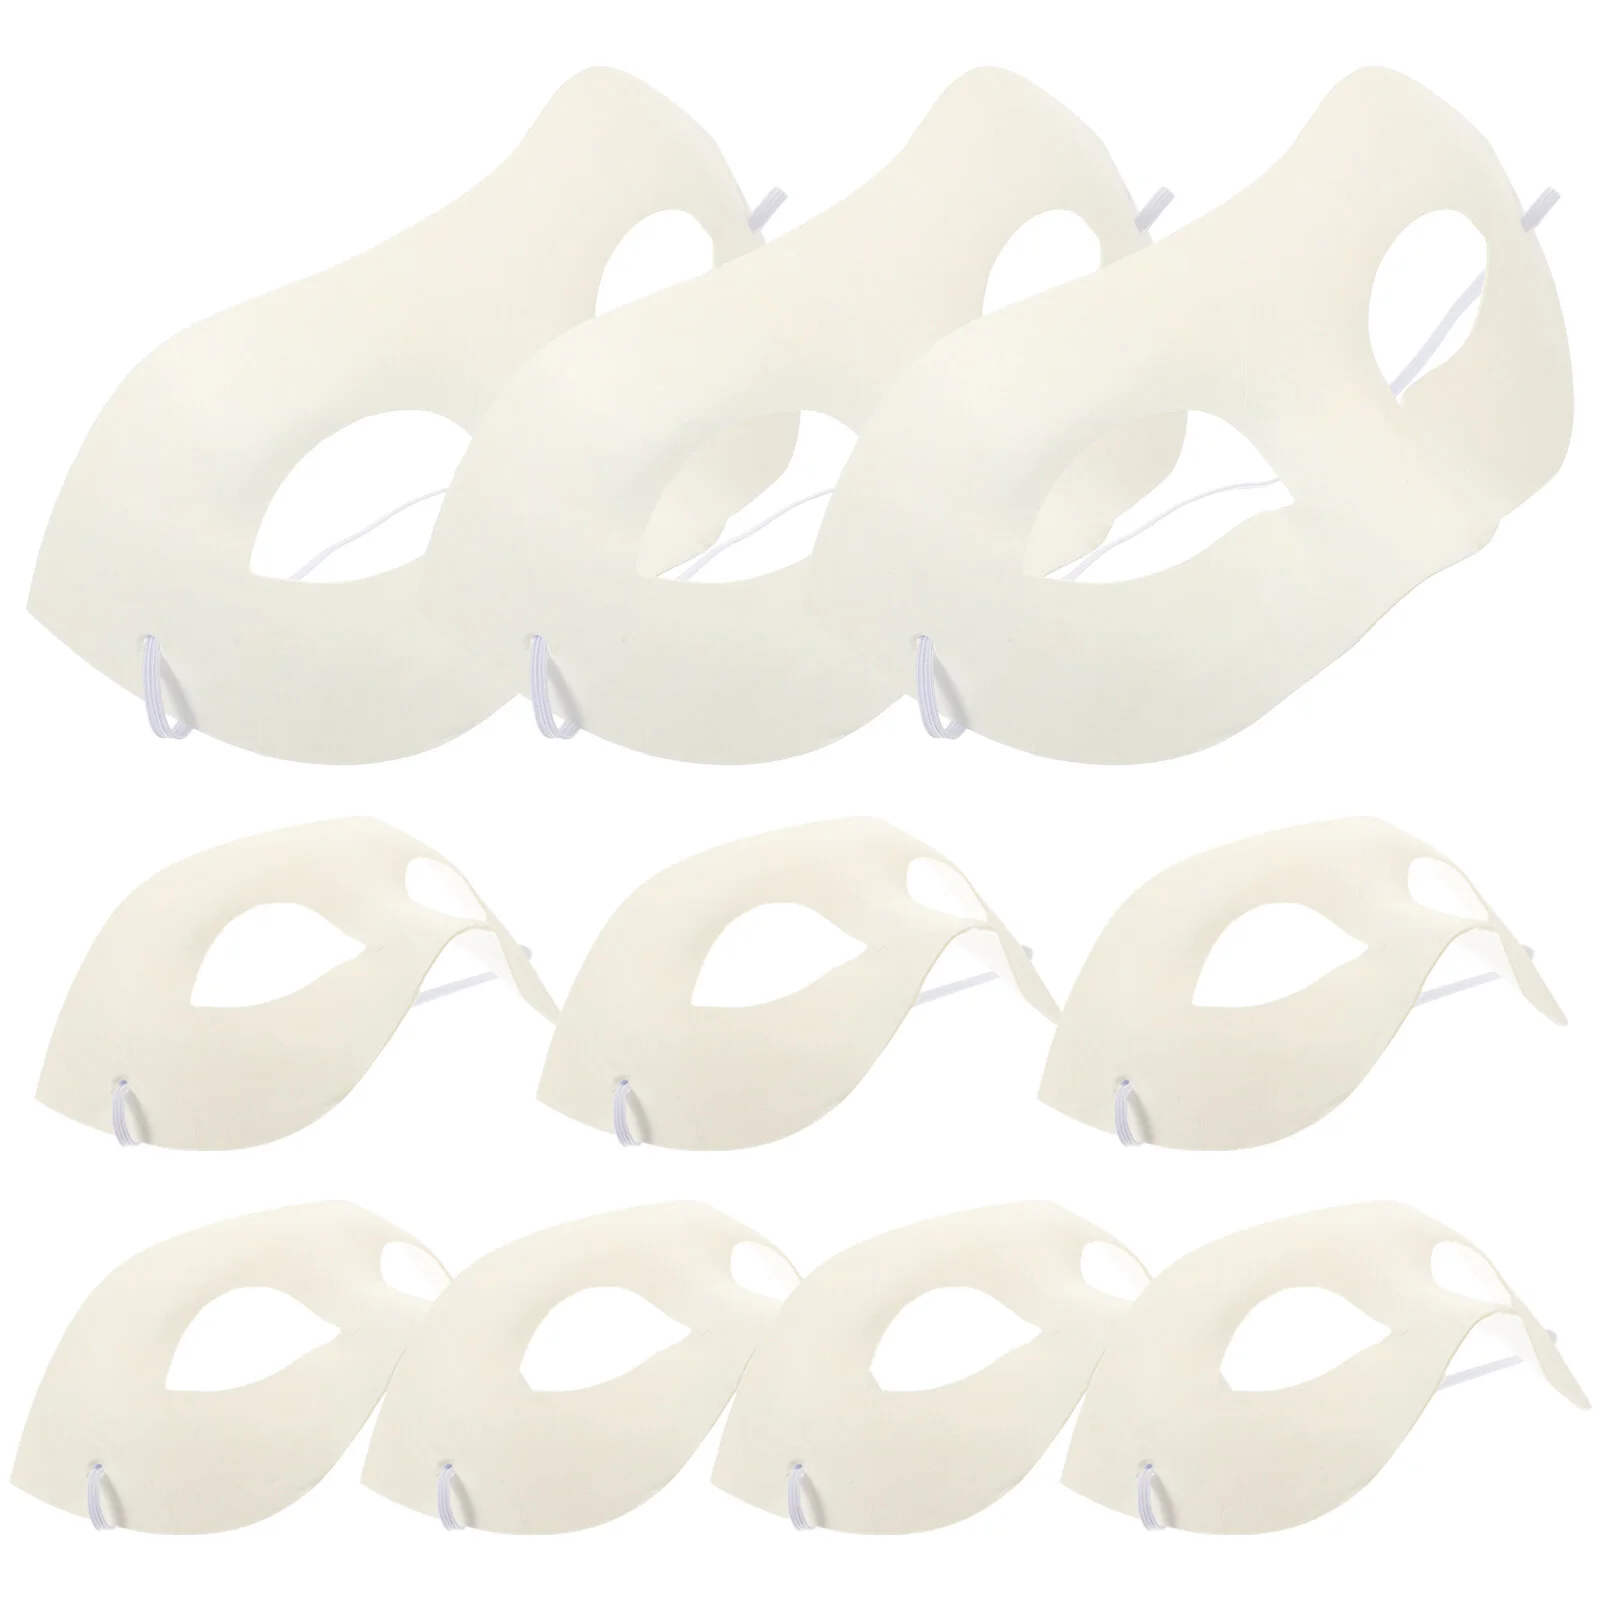 

10 Pcs Do It Yourself Bulk DIY Party Adults Makeup Halloween Prop Paper White Miss Blank Masquerade Cosplay